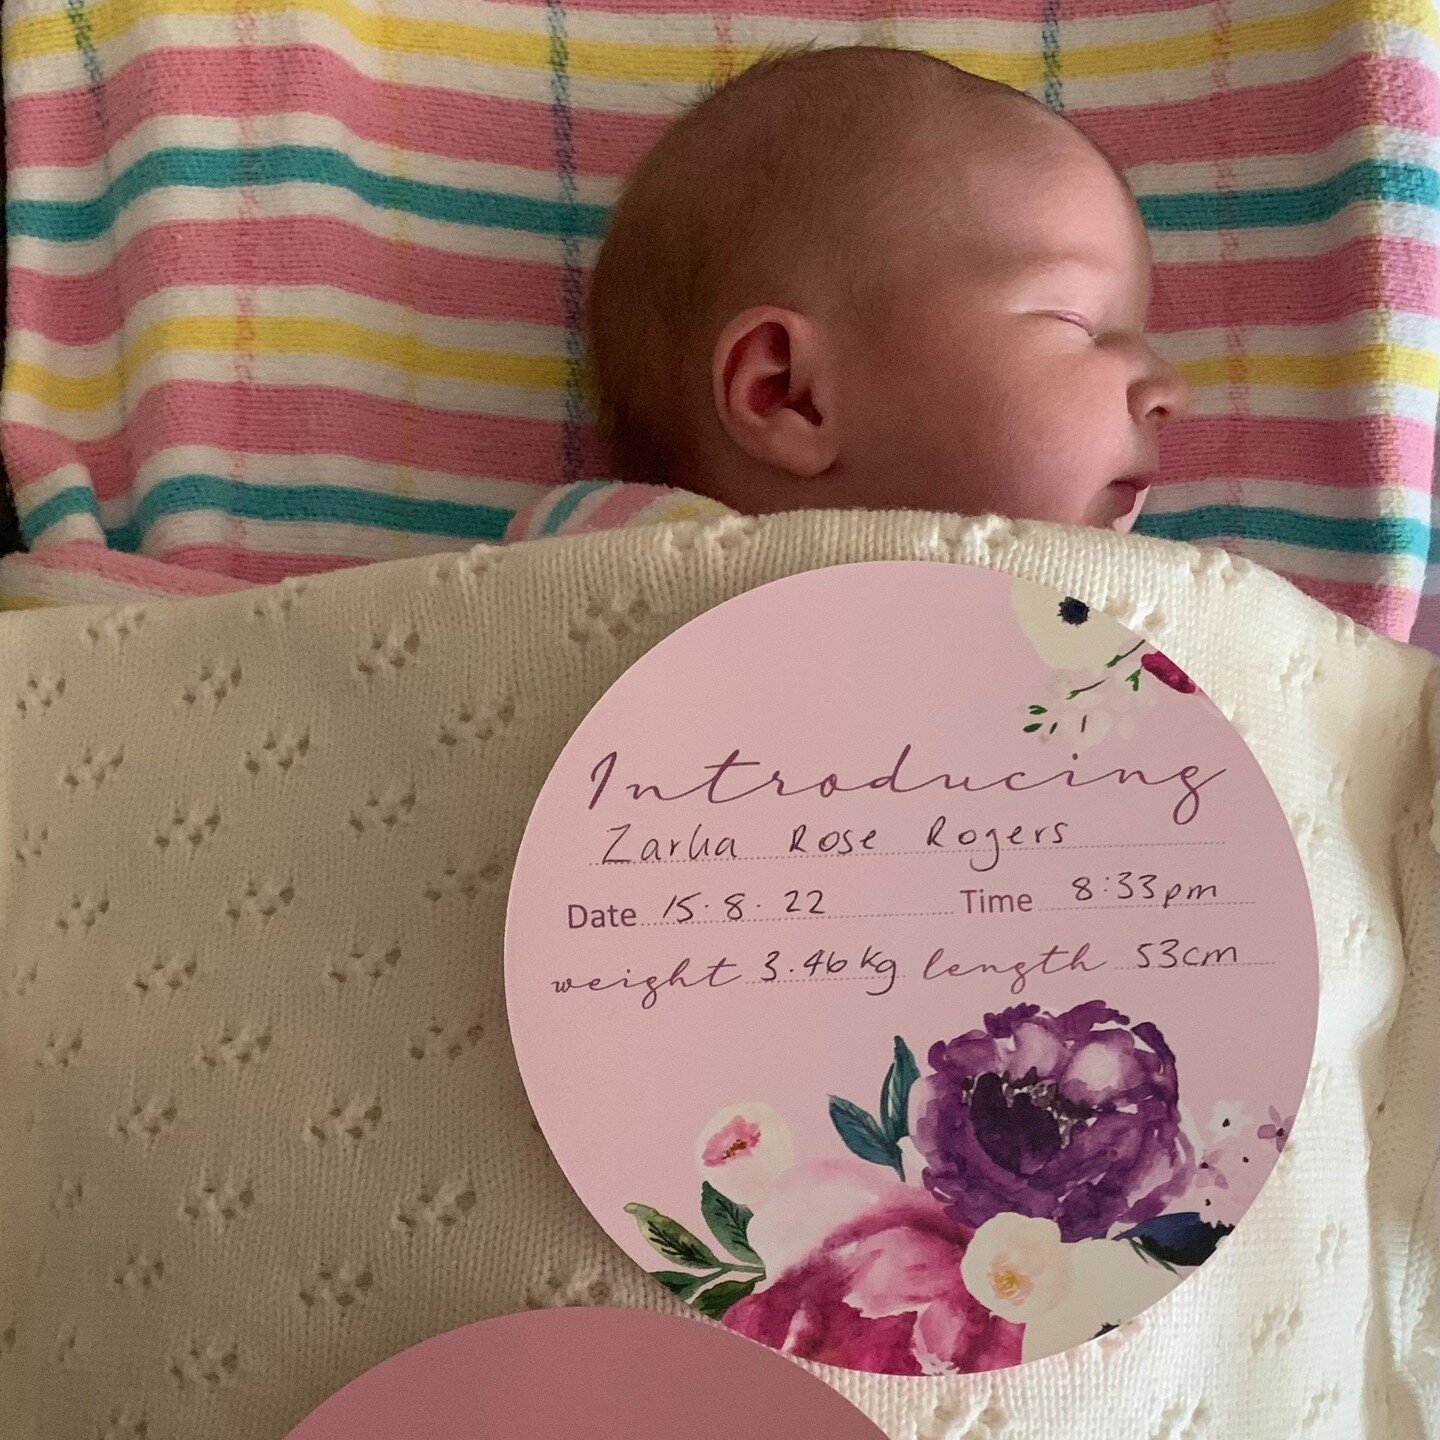 We have very exciting news we can finally share!

Brittaney and her husband Luke welcomed Zarlia Rose Rogers to the world last Monday!

Mum and bub are well and happily at home.

Congratulations!!!